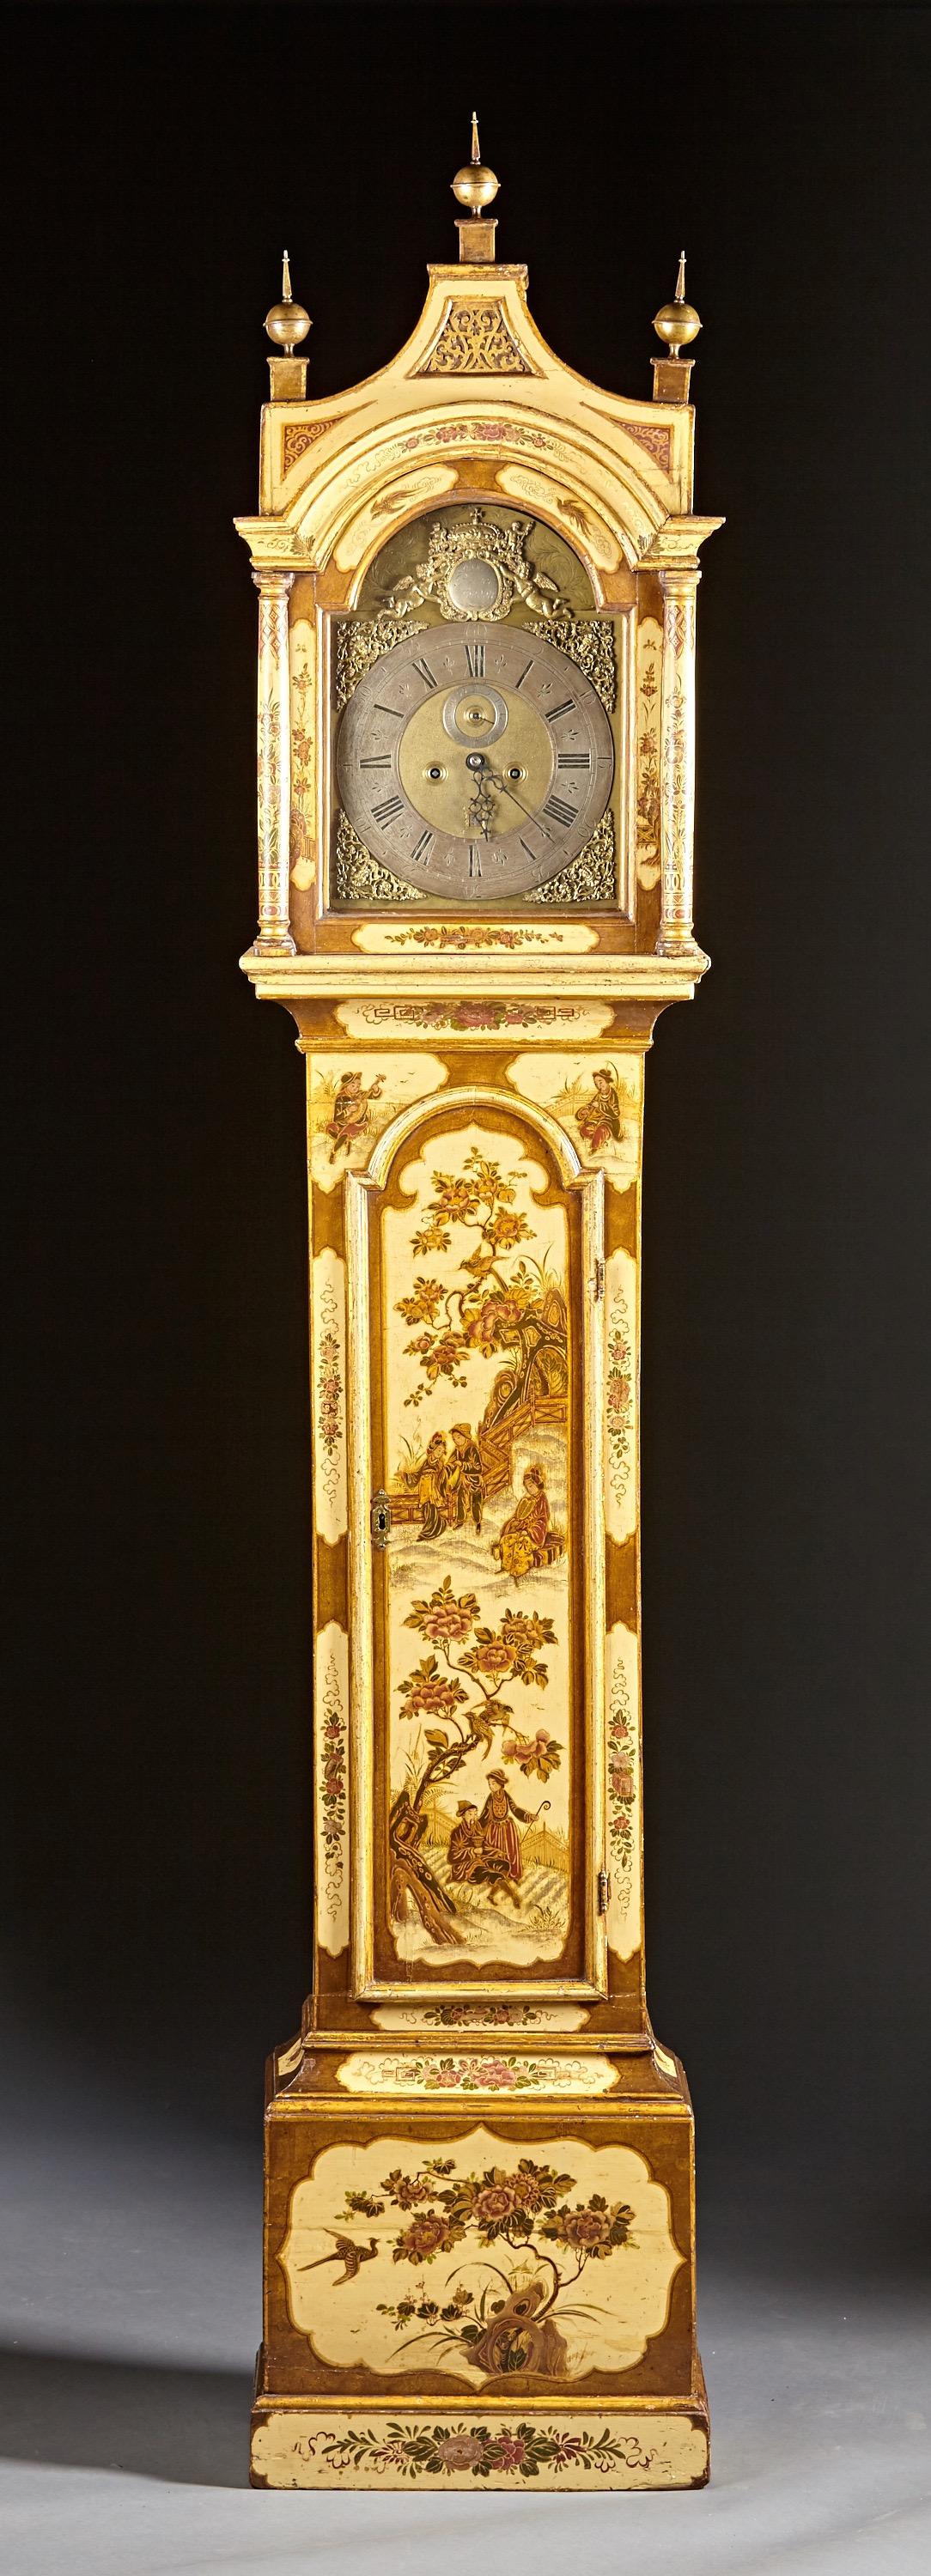 A fine English Georgian cream colored lacquered tall case clock having a pagoda shaped top encasing period movement by Robert Player, London (1700-1740) above a fully decorated case raised on a similarly decorated molded base. English, circa 1740.